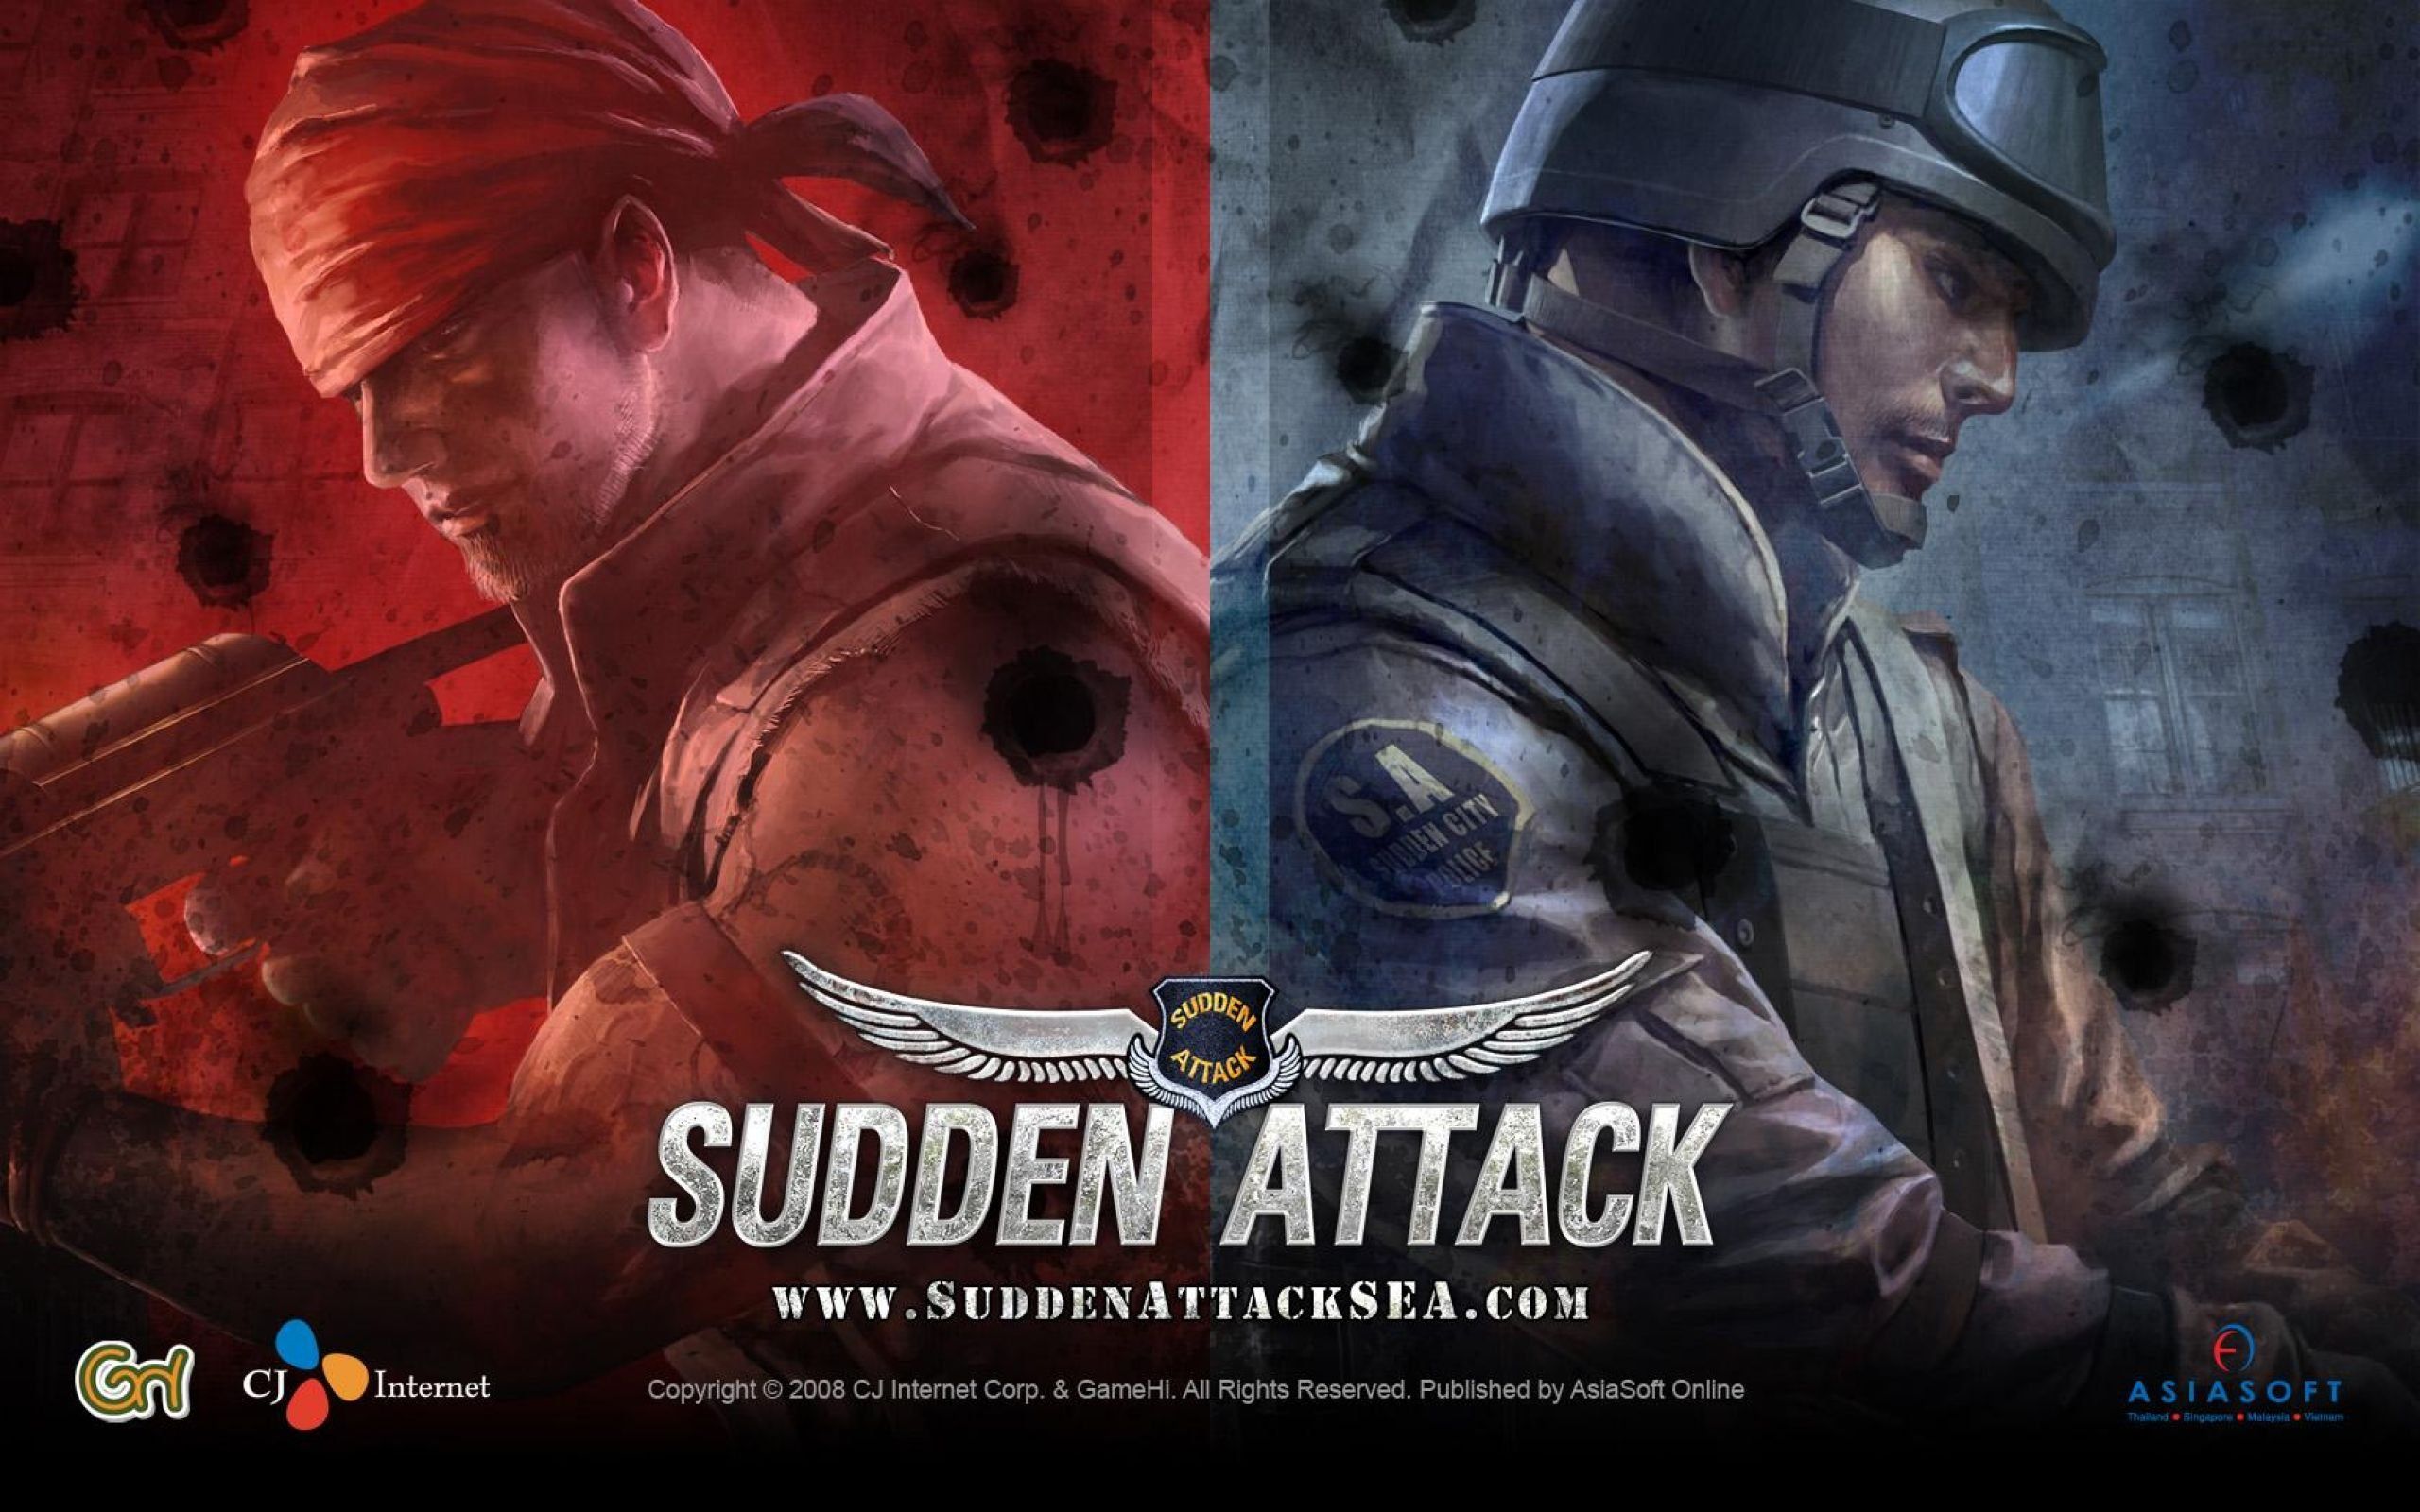 SUDDEN ATTACK shooter action online tactical fighting 25